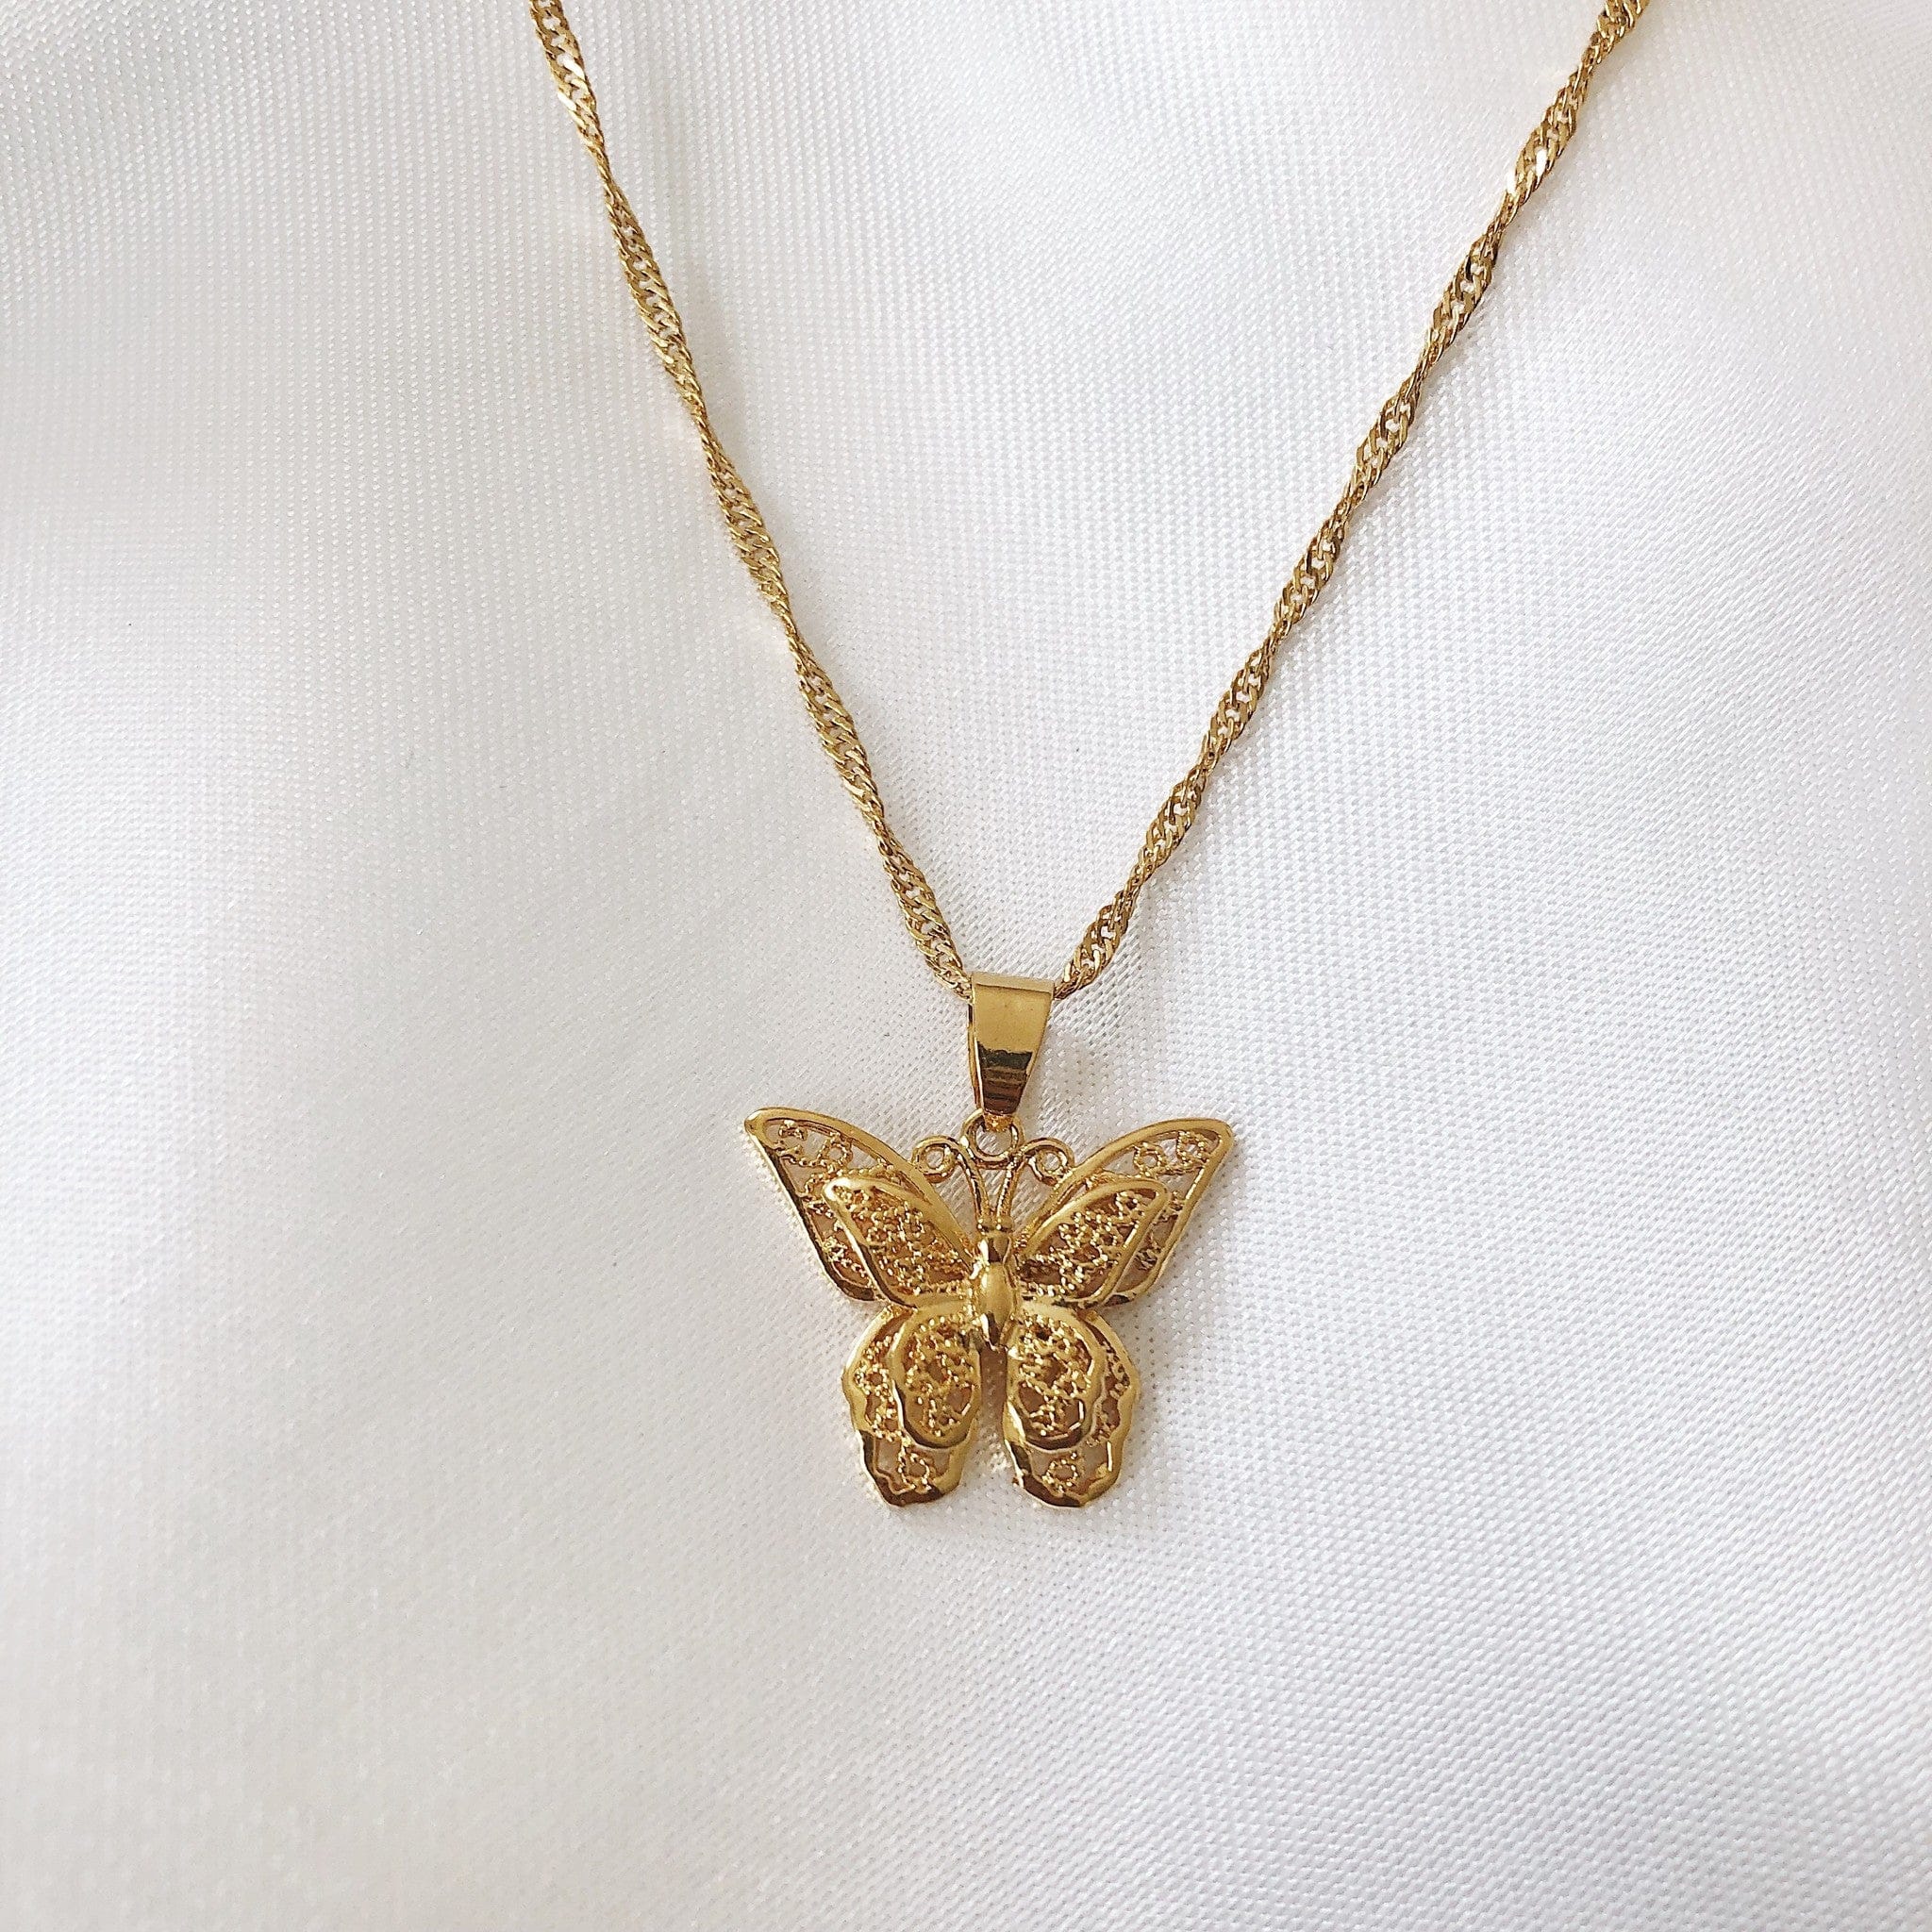 Poise Butterfly Necklace - Pura Jewels